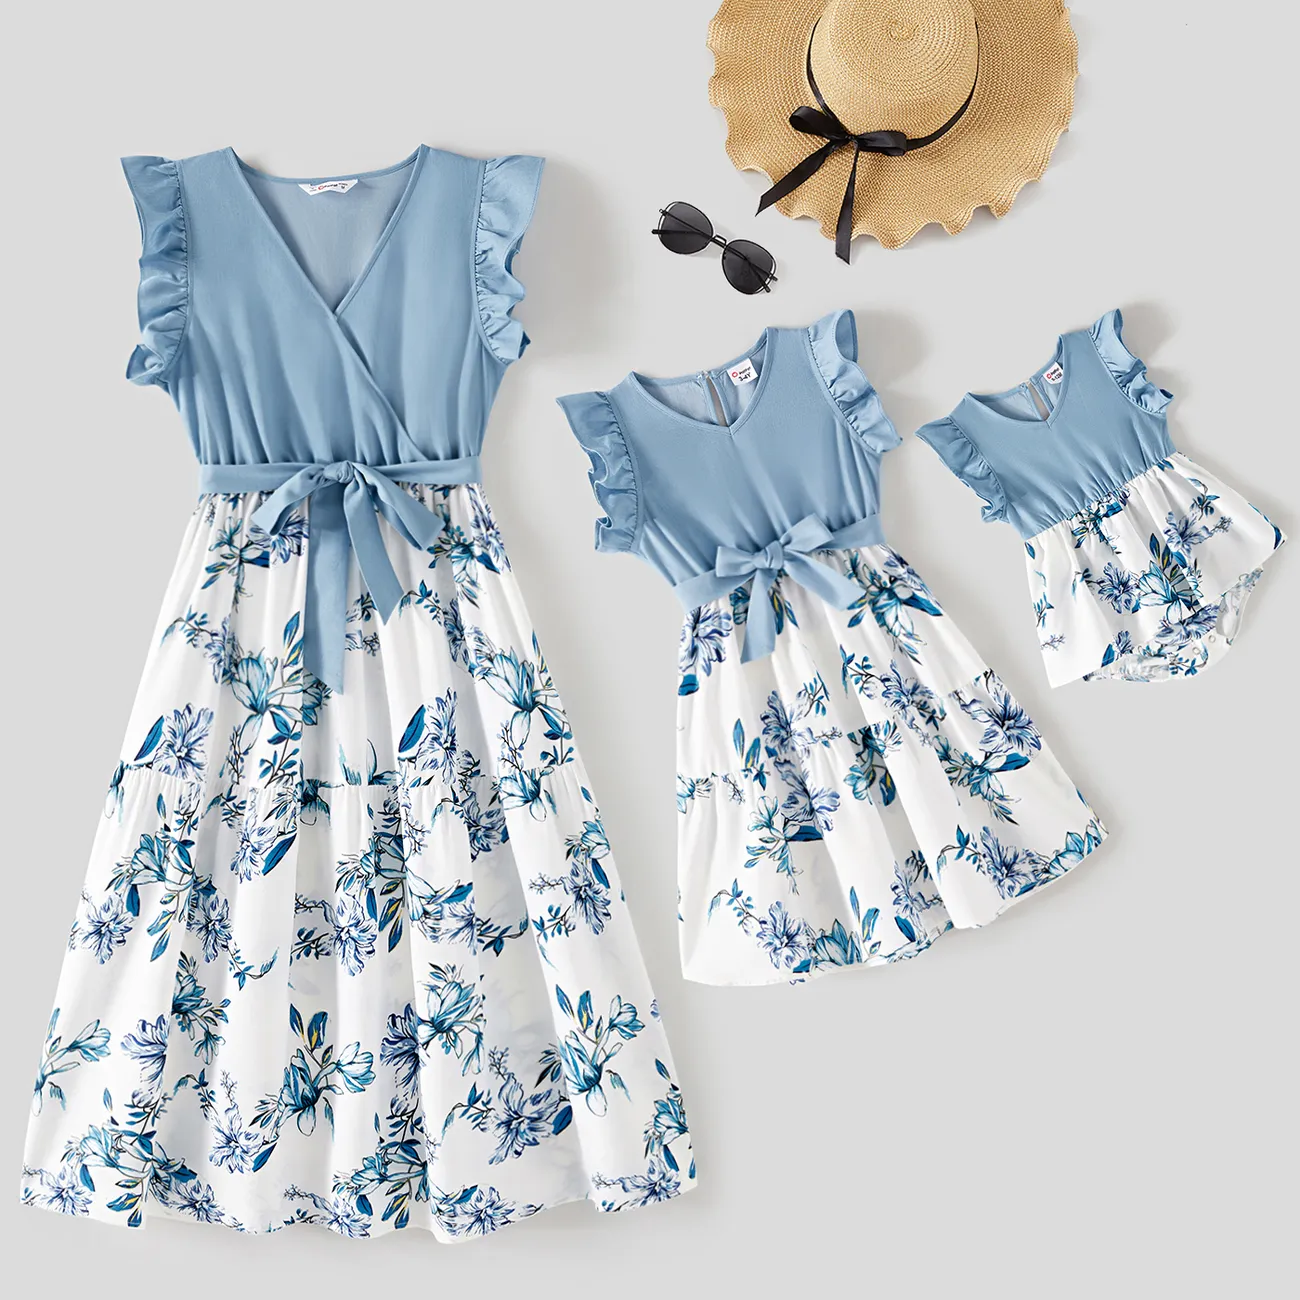 Mommy and Me Floral Print Spliced Solid V Neck Ruffle Trim Sleeveless Dresses Light Blue big image 1